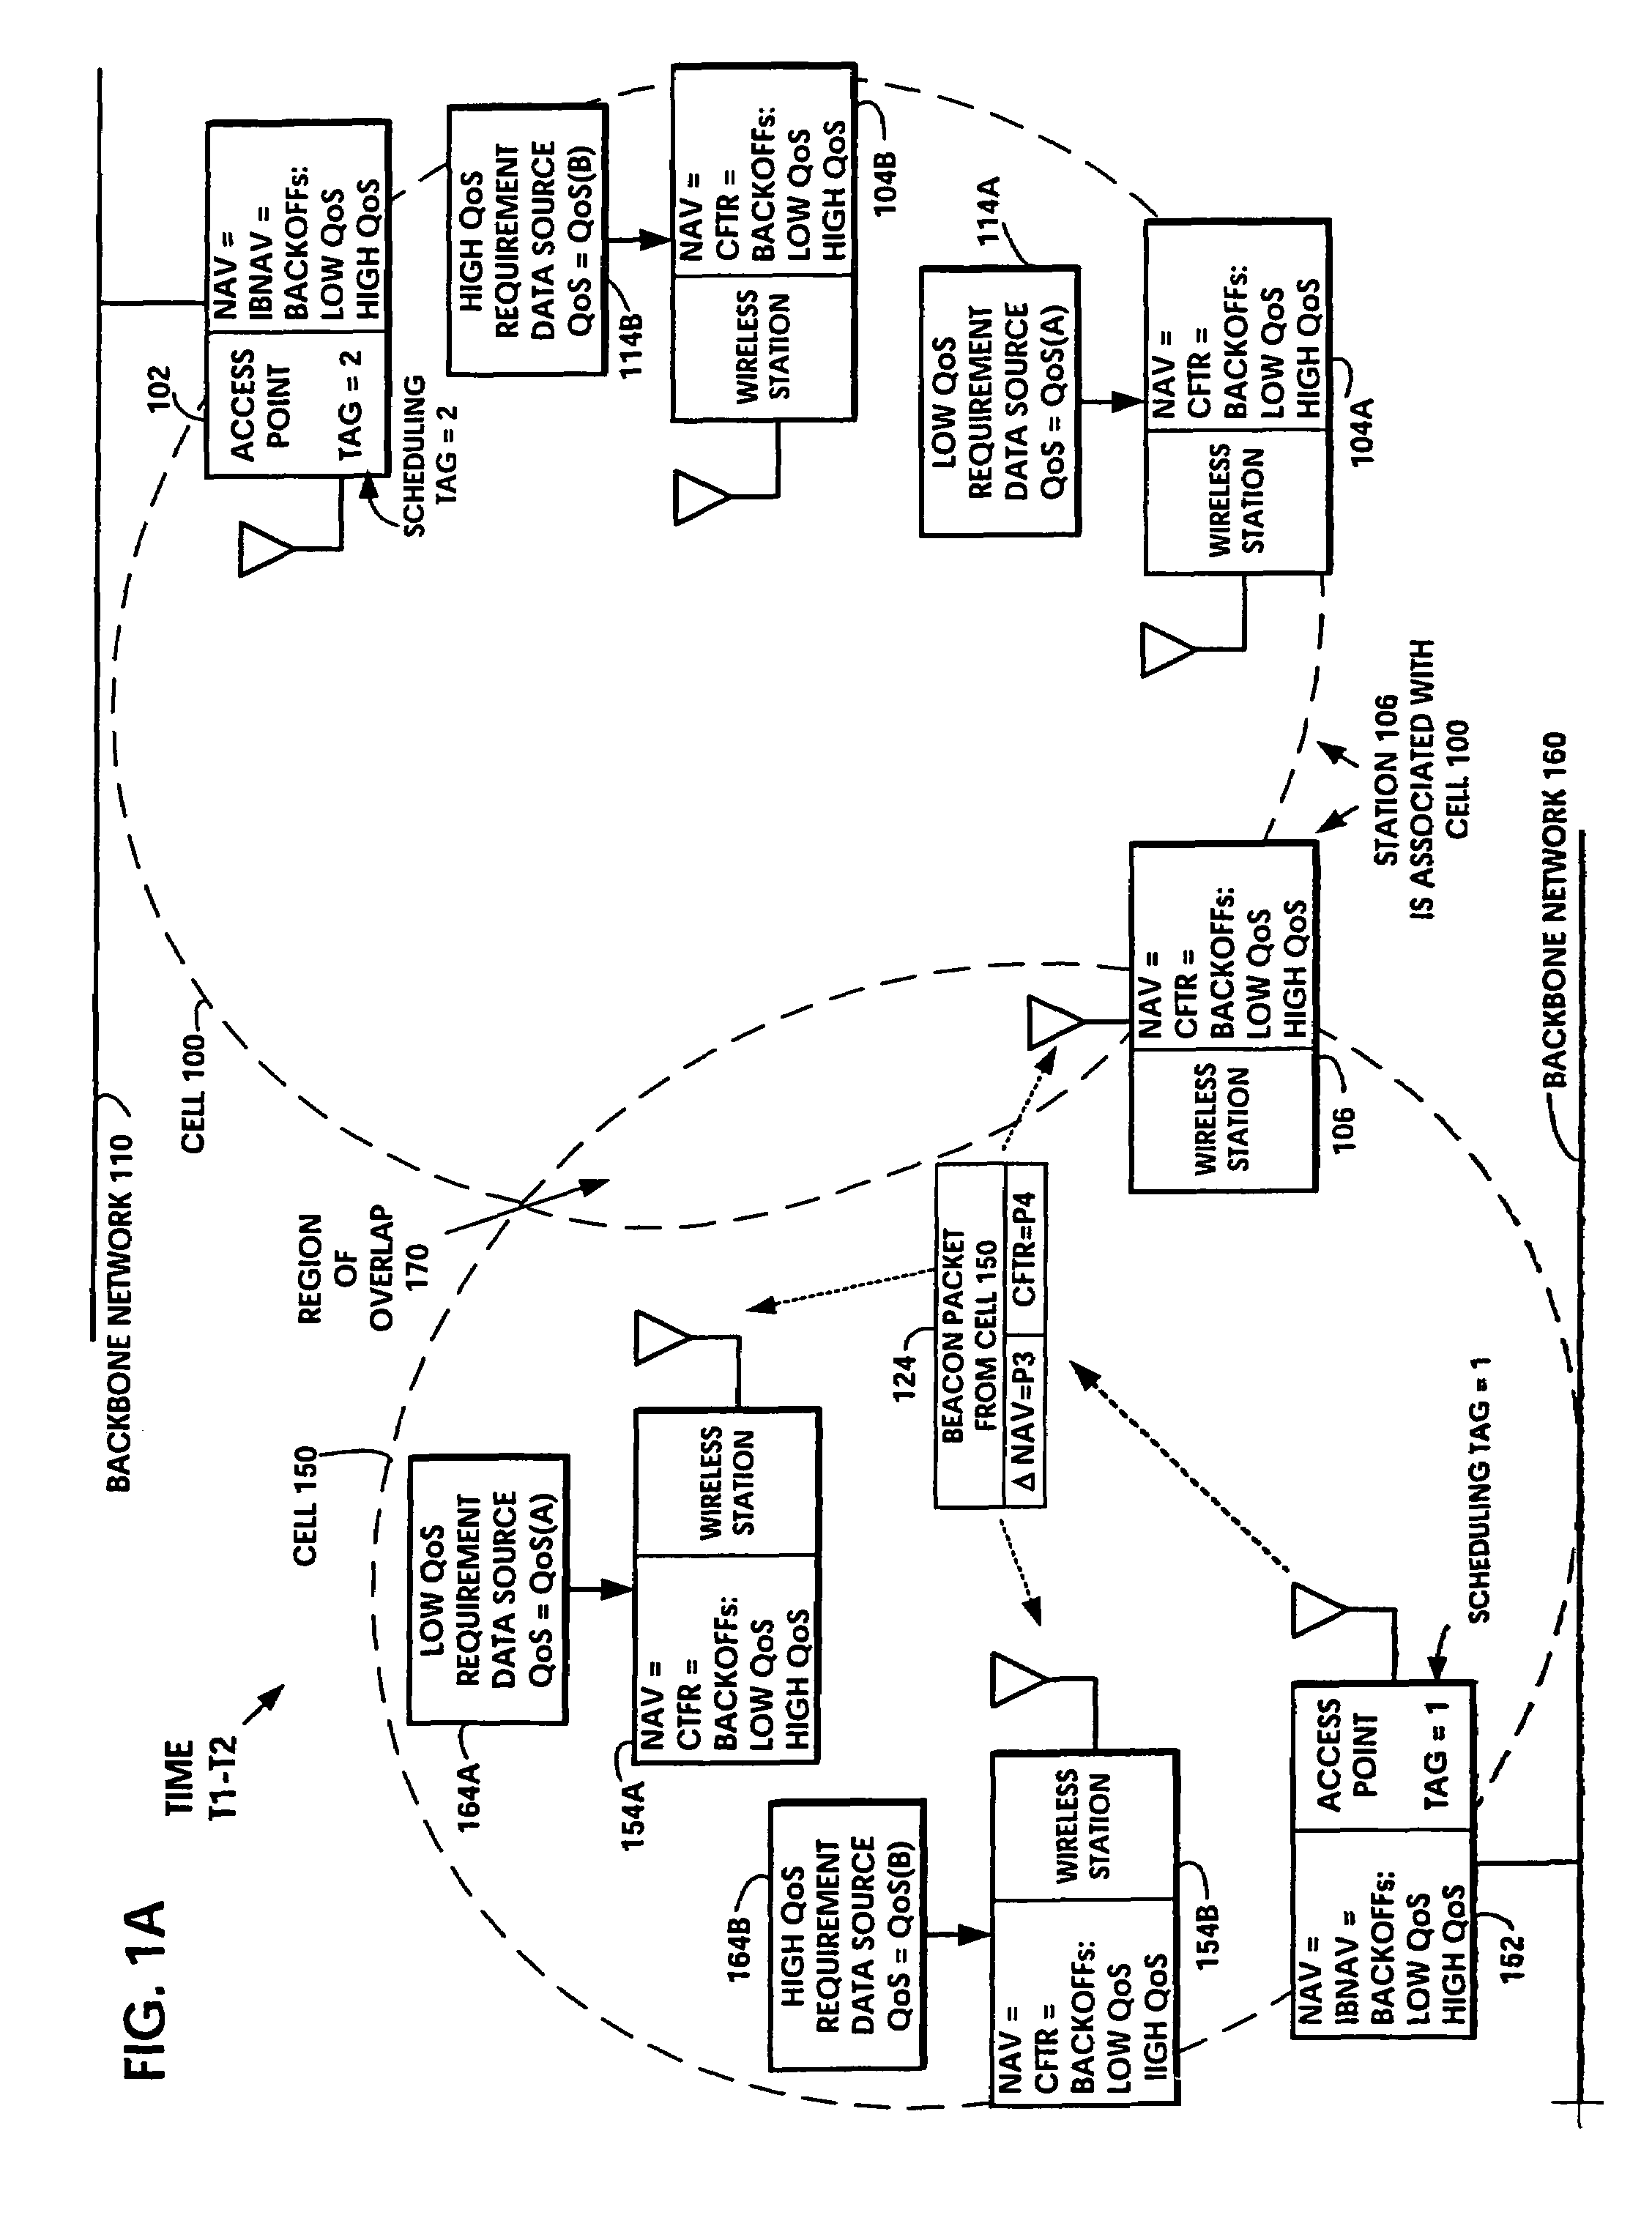 Hybrid coordination function (HCF) access through tiered contention and overlapped wireless cell mitigation